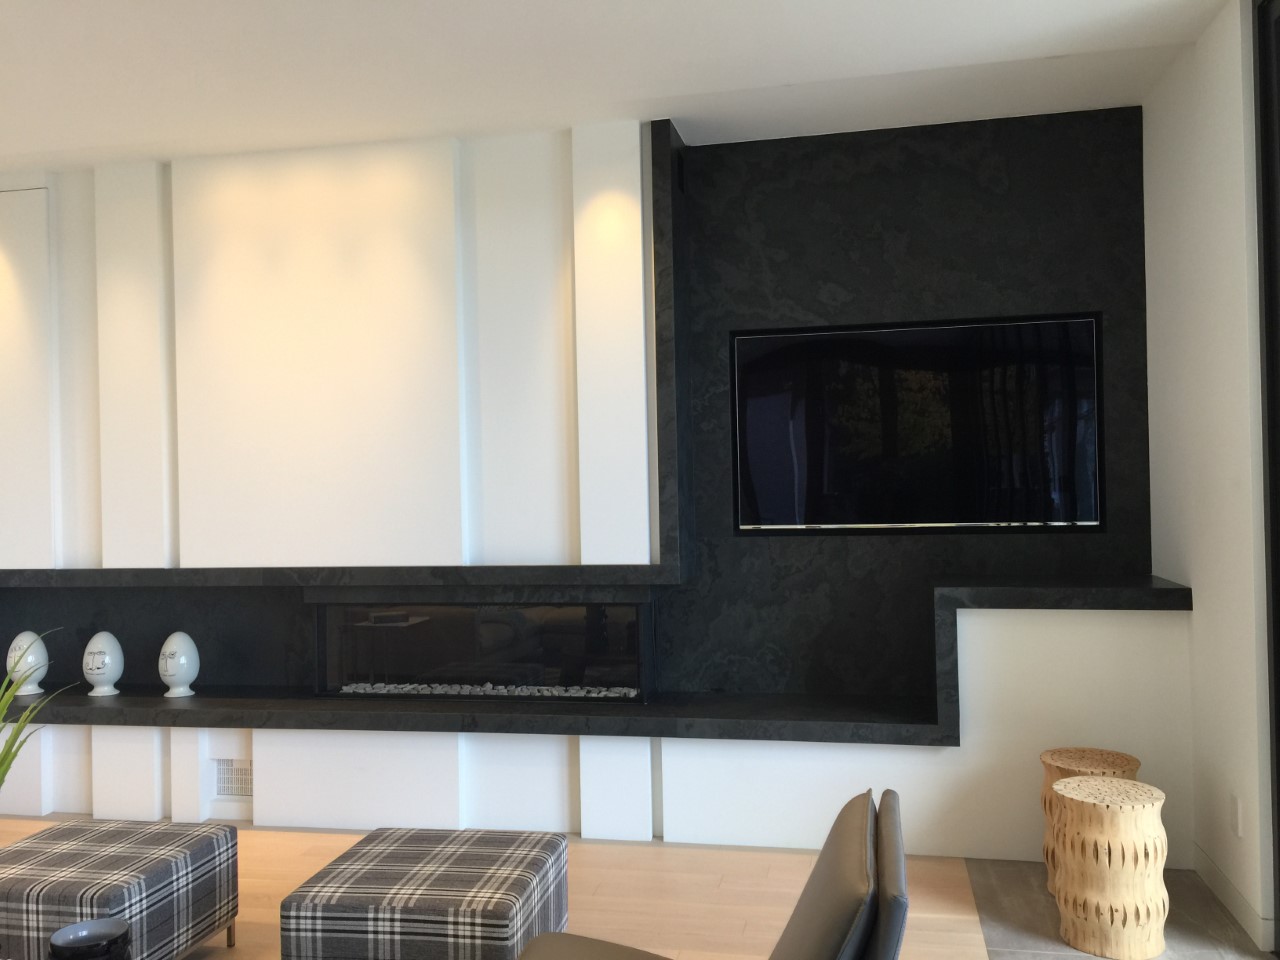 Mitered Edge Fireplace & Feature Wall 2.jpg